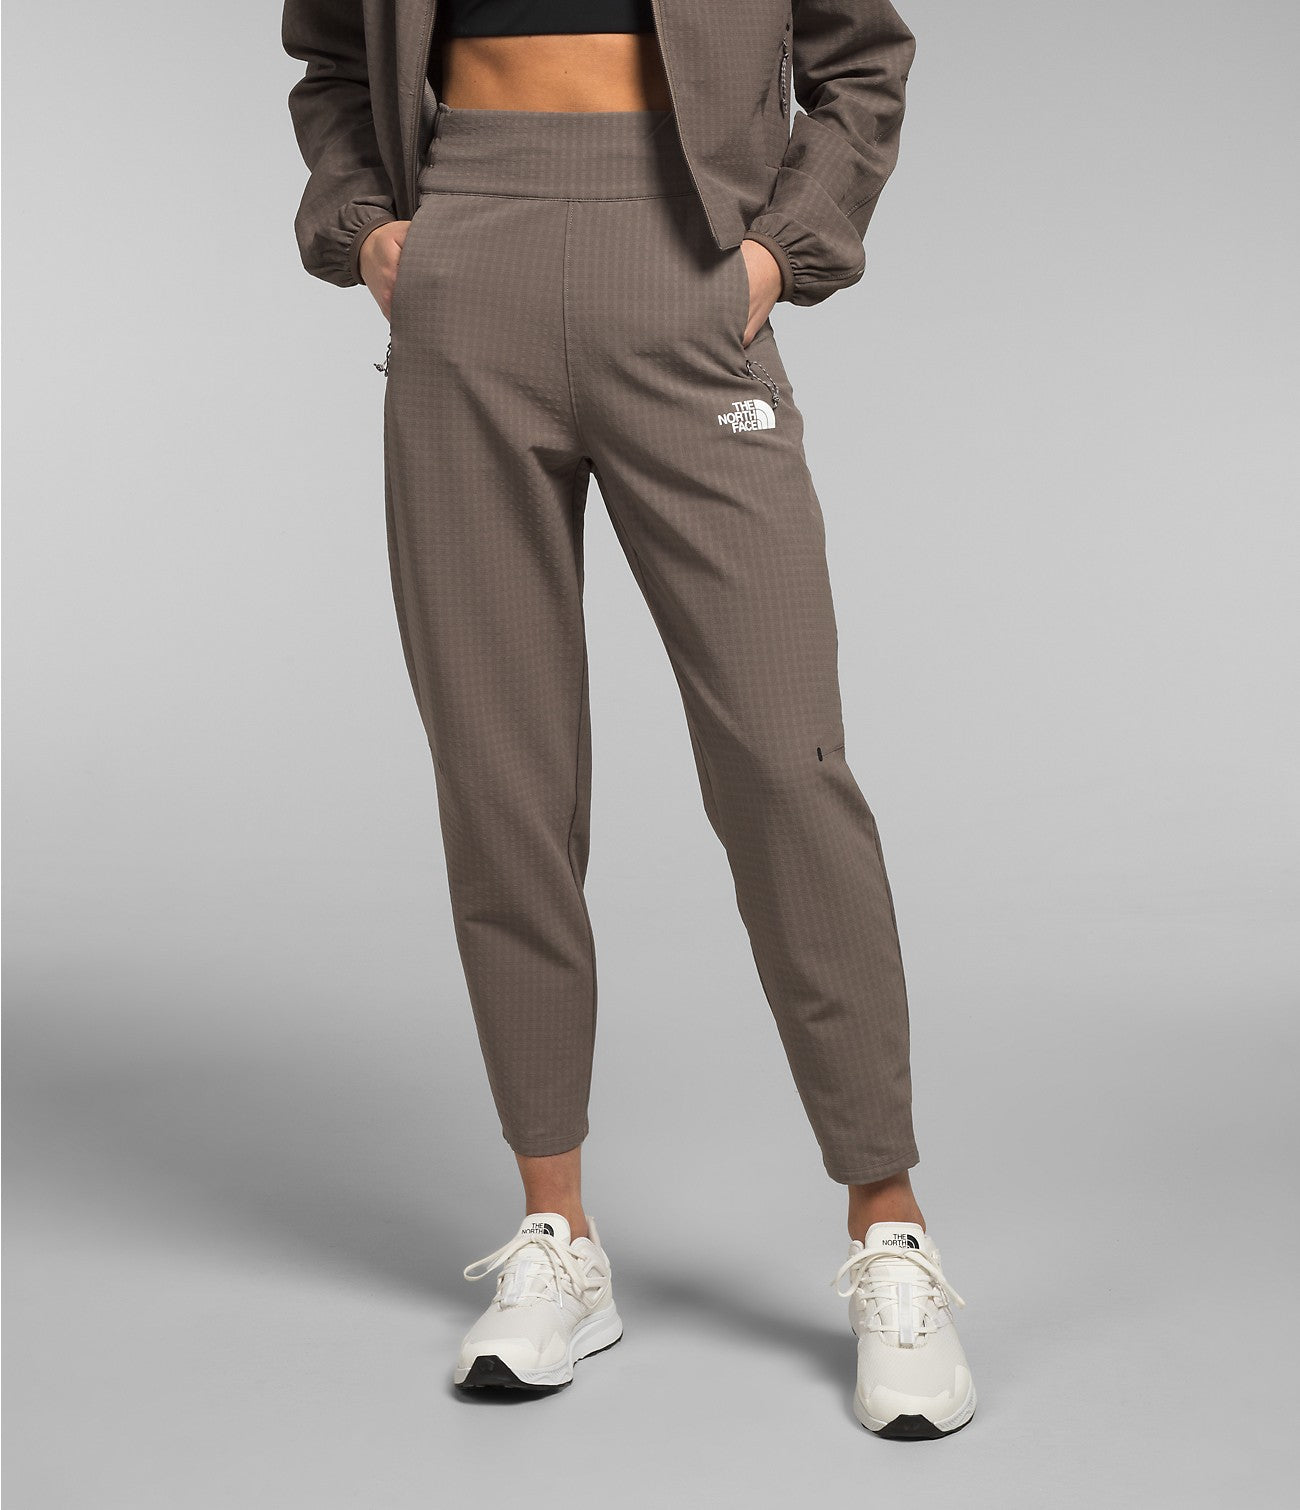 The North Face, Pants & Jumpsuits, The North Face Pants Womens Grey  Lightweight Wind Resistant Hiking Size 8